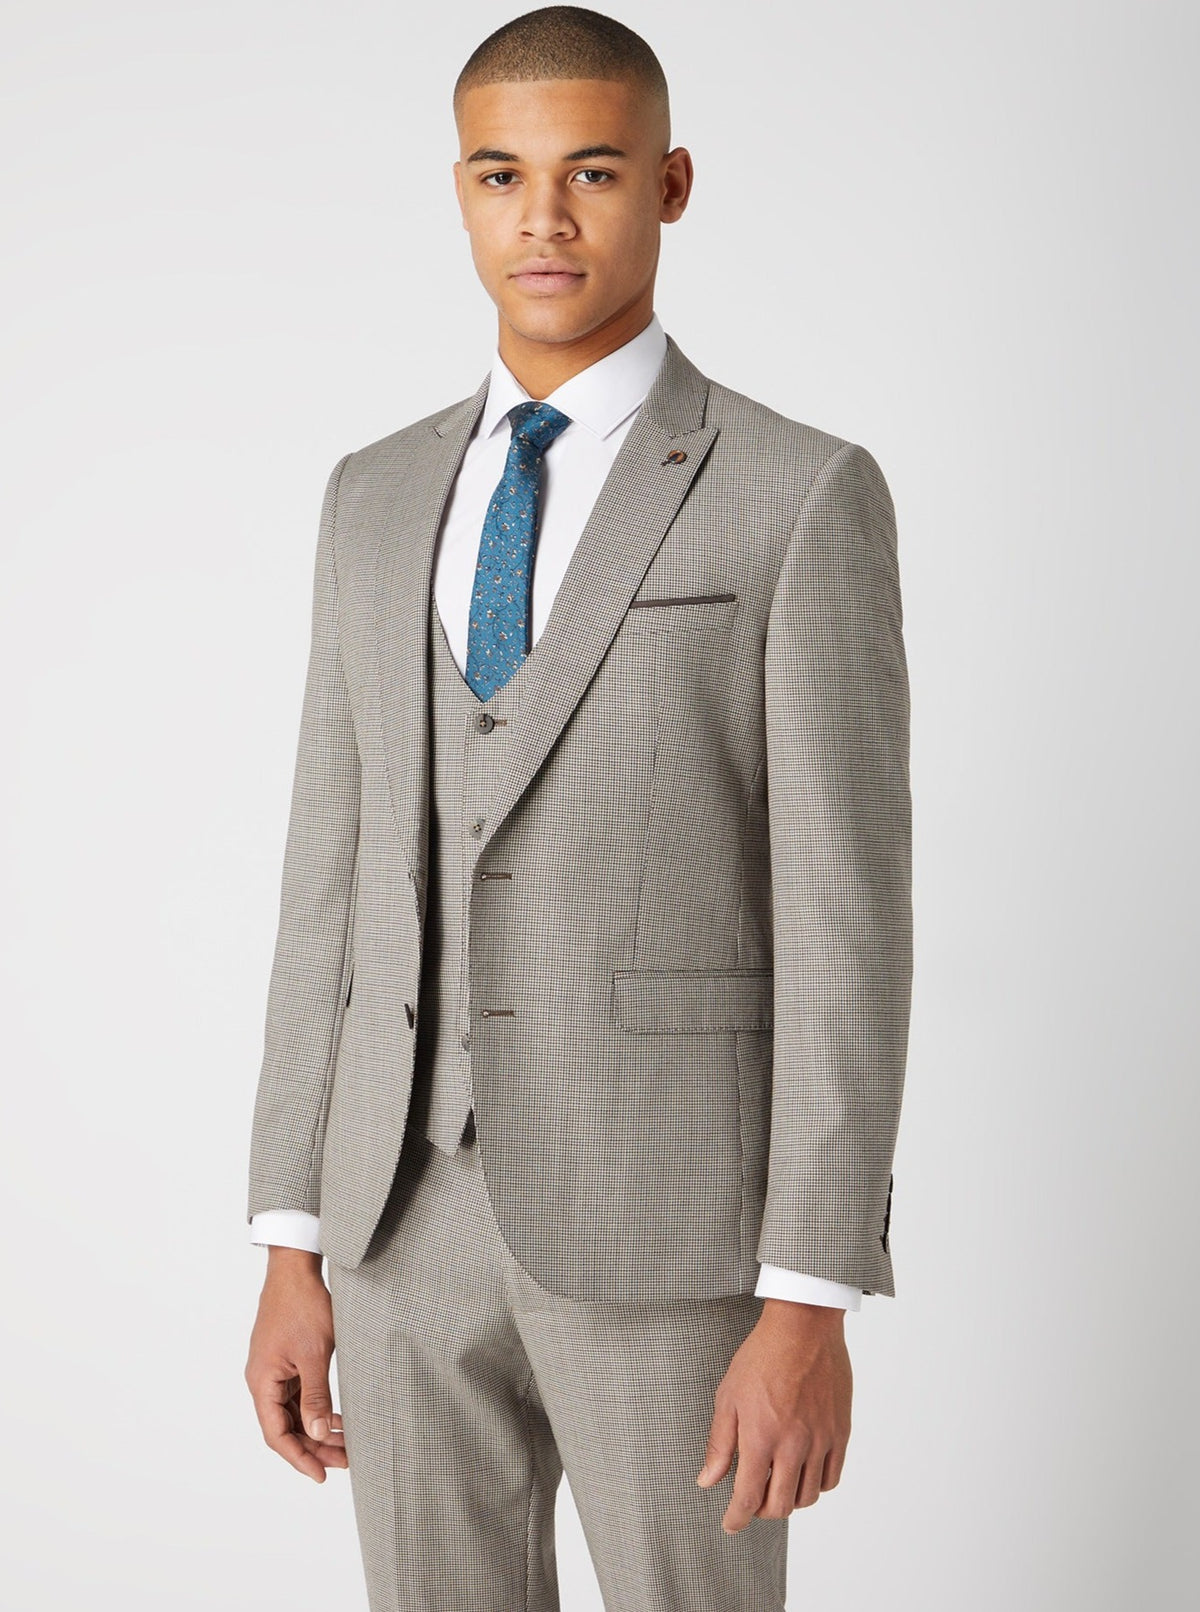 Mario Slim Fit Mix and Match Suit Jacket